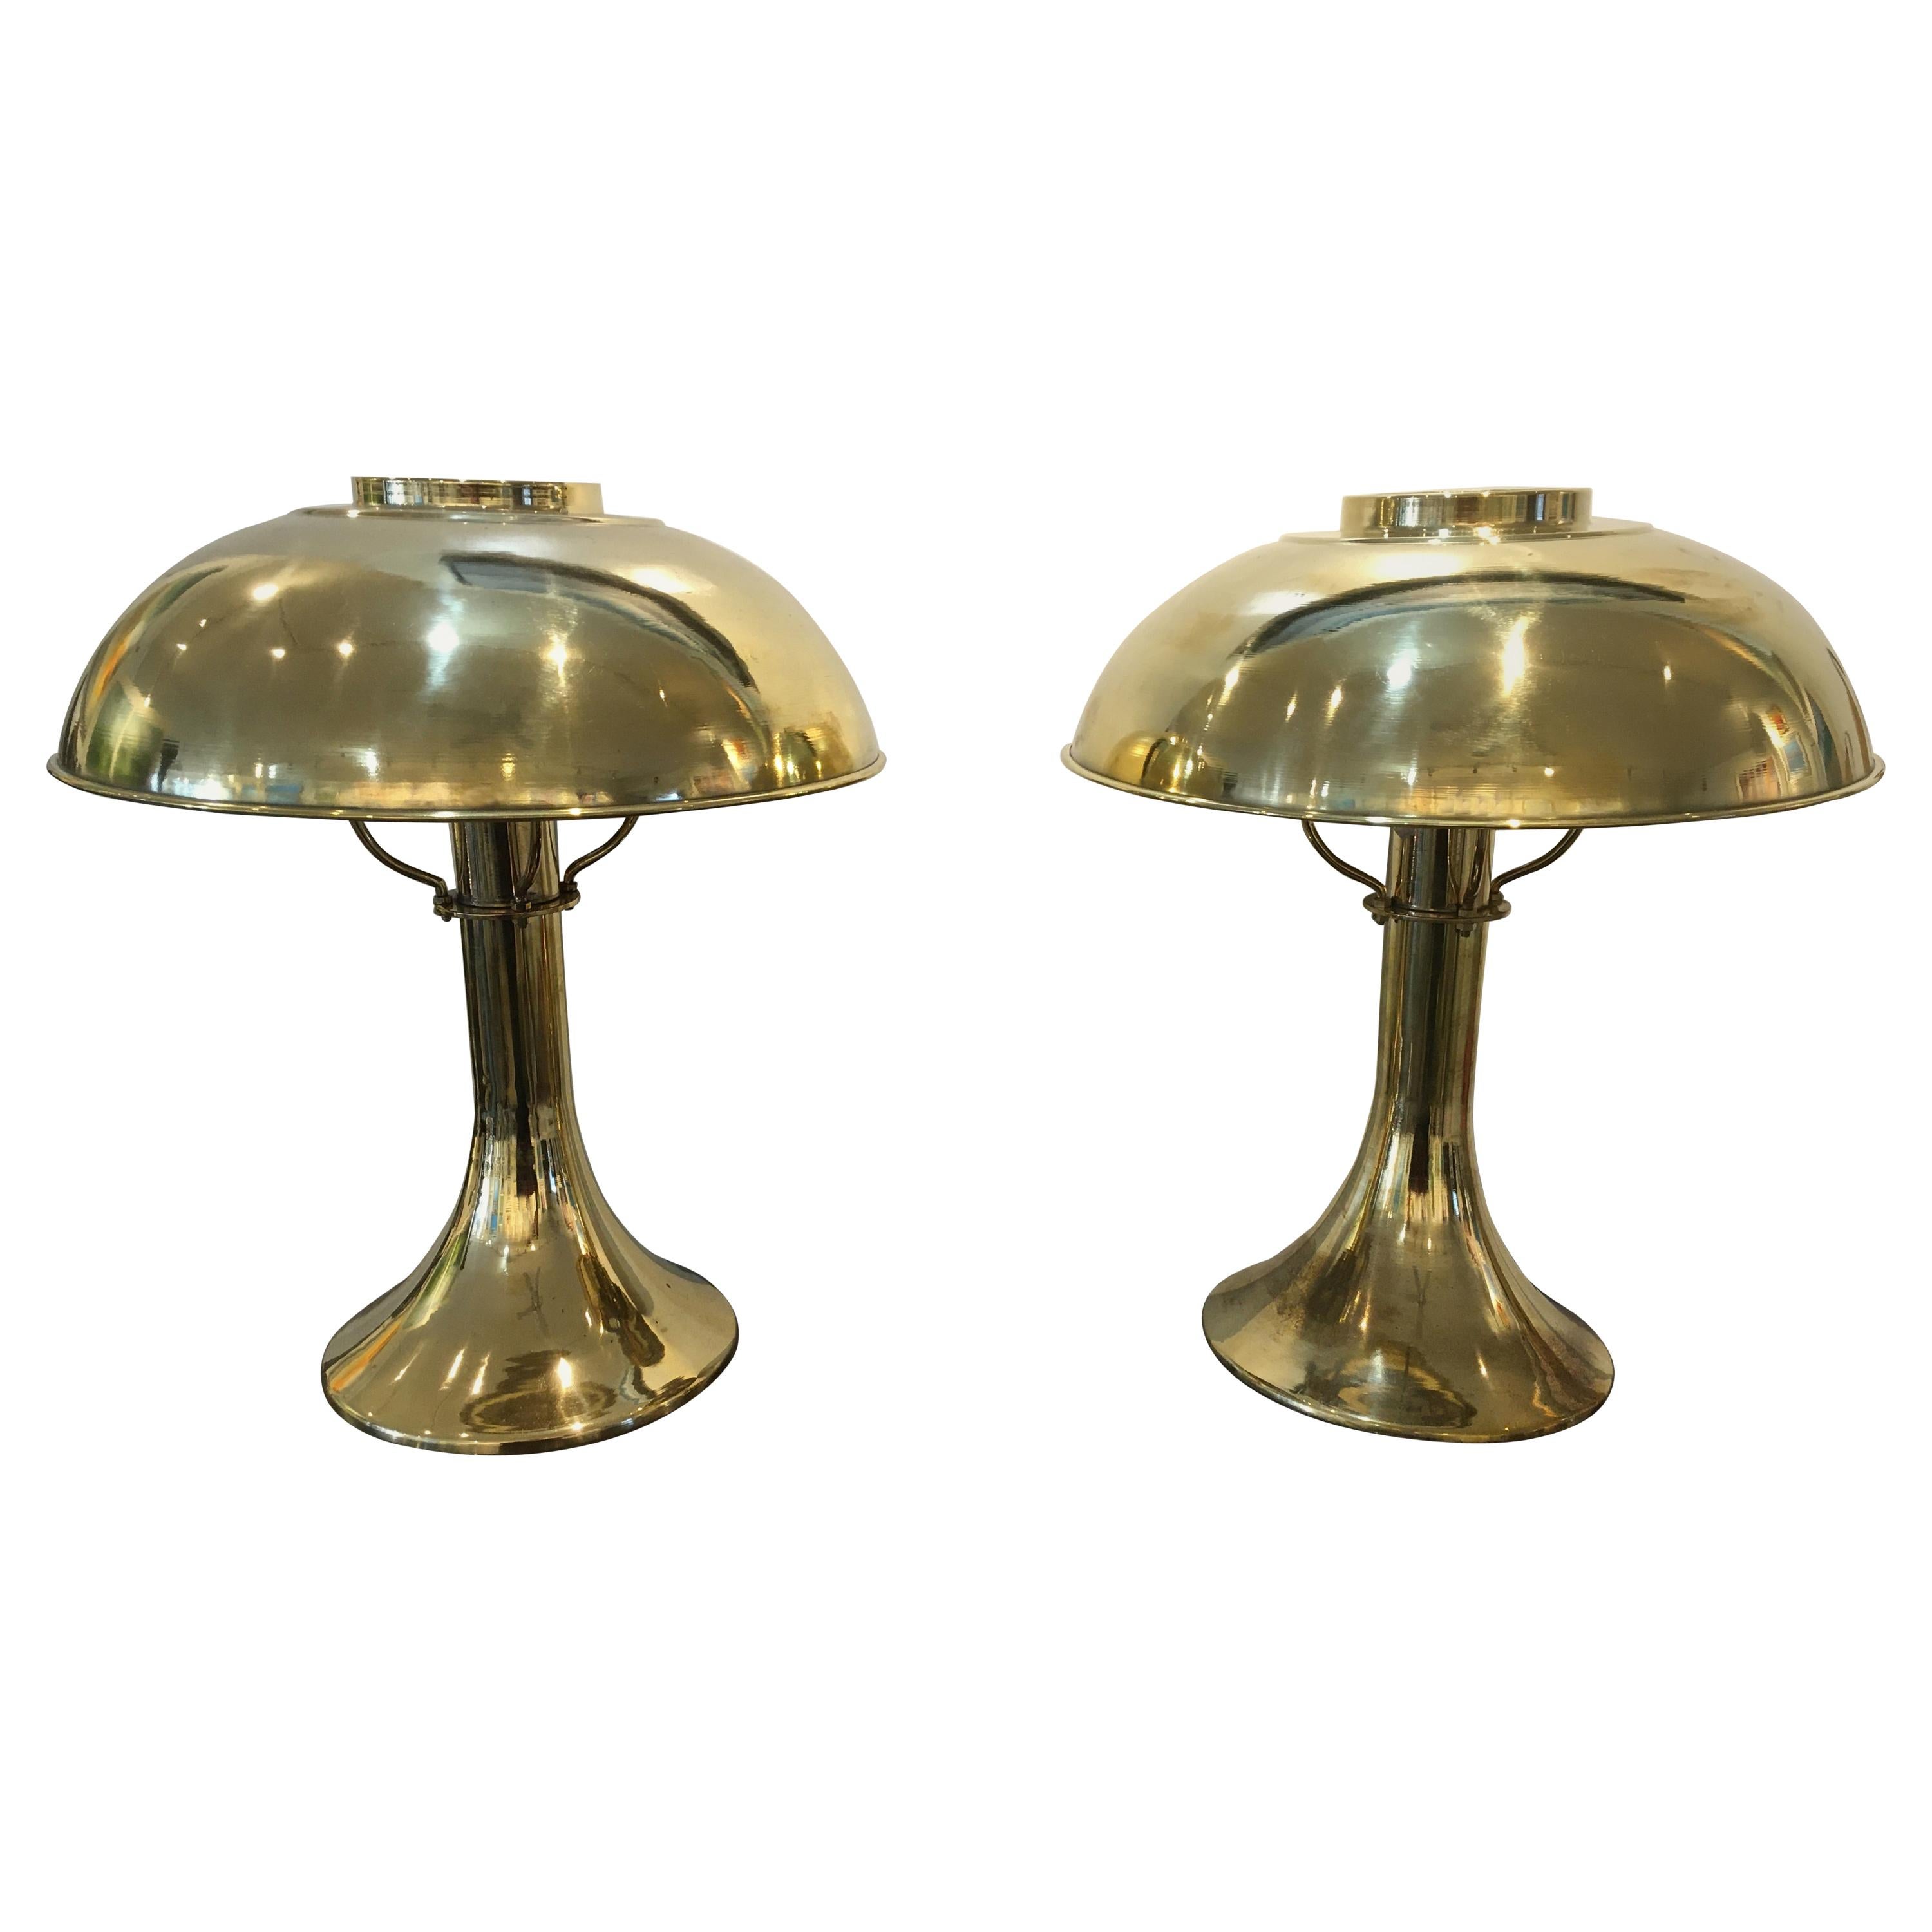 Pair of Brass Ship's Nautical Table Lamps